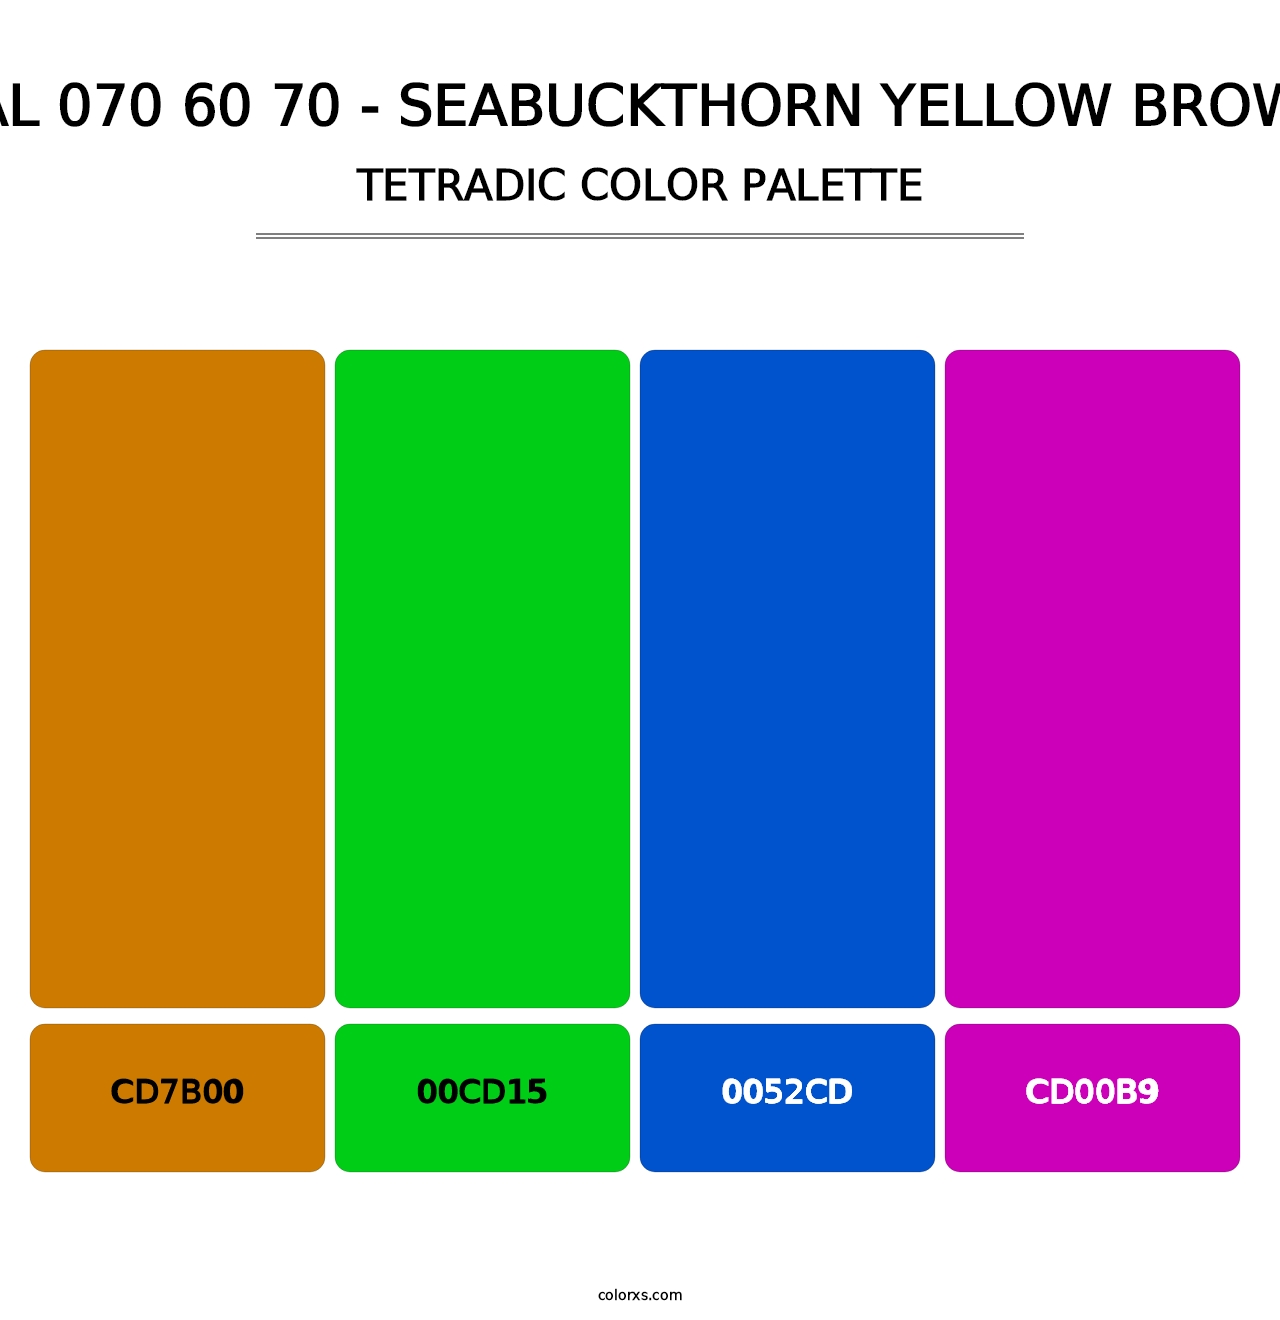 RAL 070 60 70 - Seabuckthorn Yellow Brown - Tetradic Color Palette